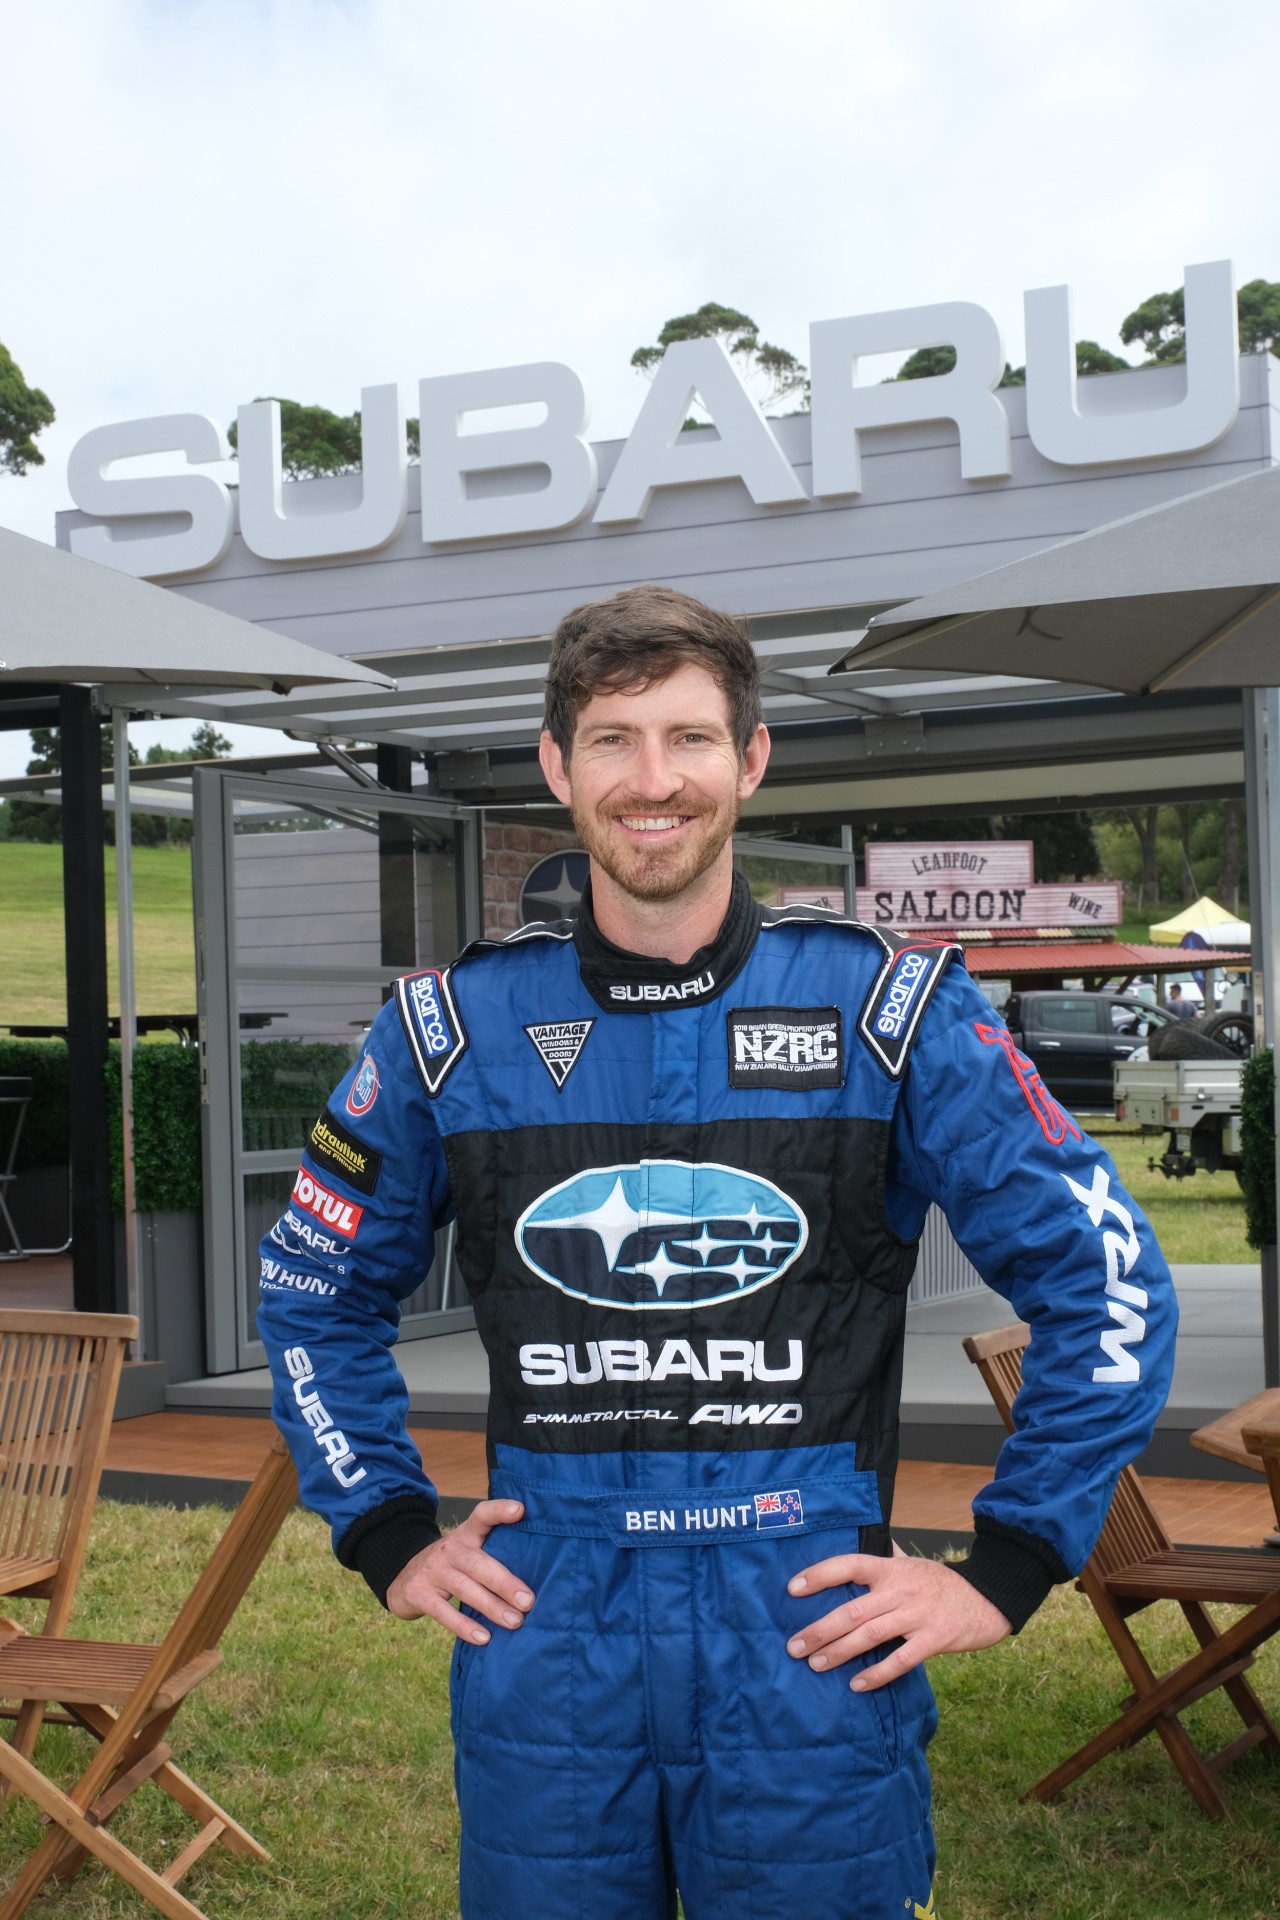 Subaru brand ambassador Ben Hunt is driving his 2004 Subaru WRX STI he built with his dad to do club rallies with at the 2019 Leadfoot Festival.